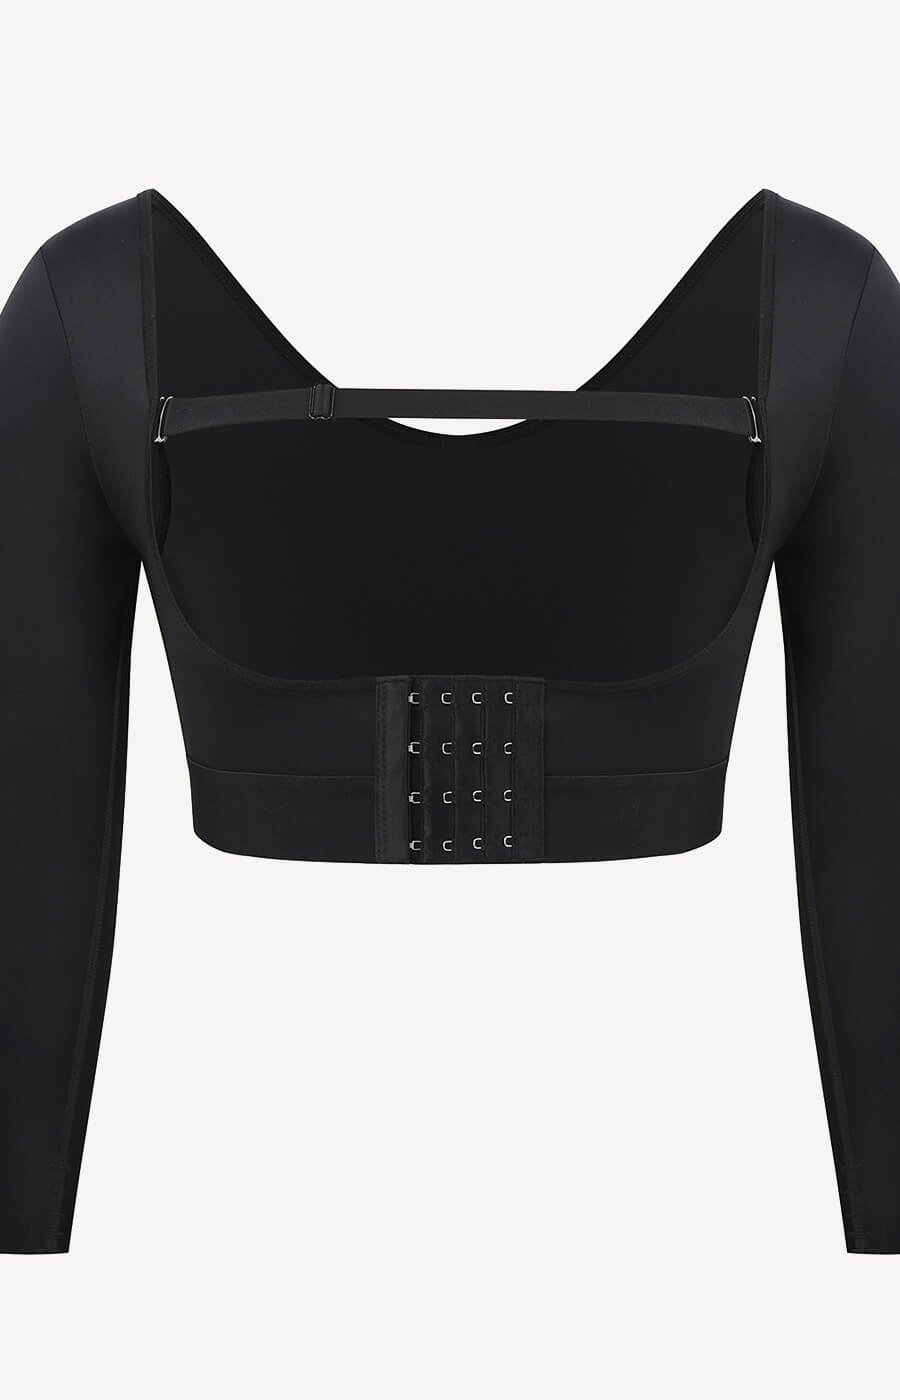 AirSlim® Posture Corrector Shapewear Open Bust Shaper With, 42% OFF